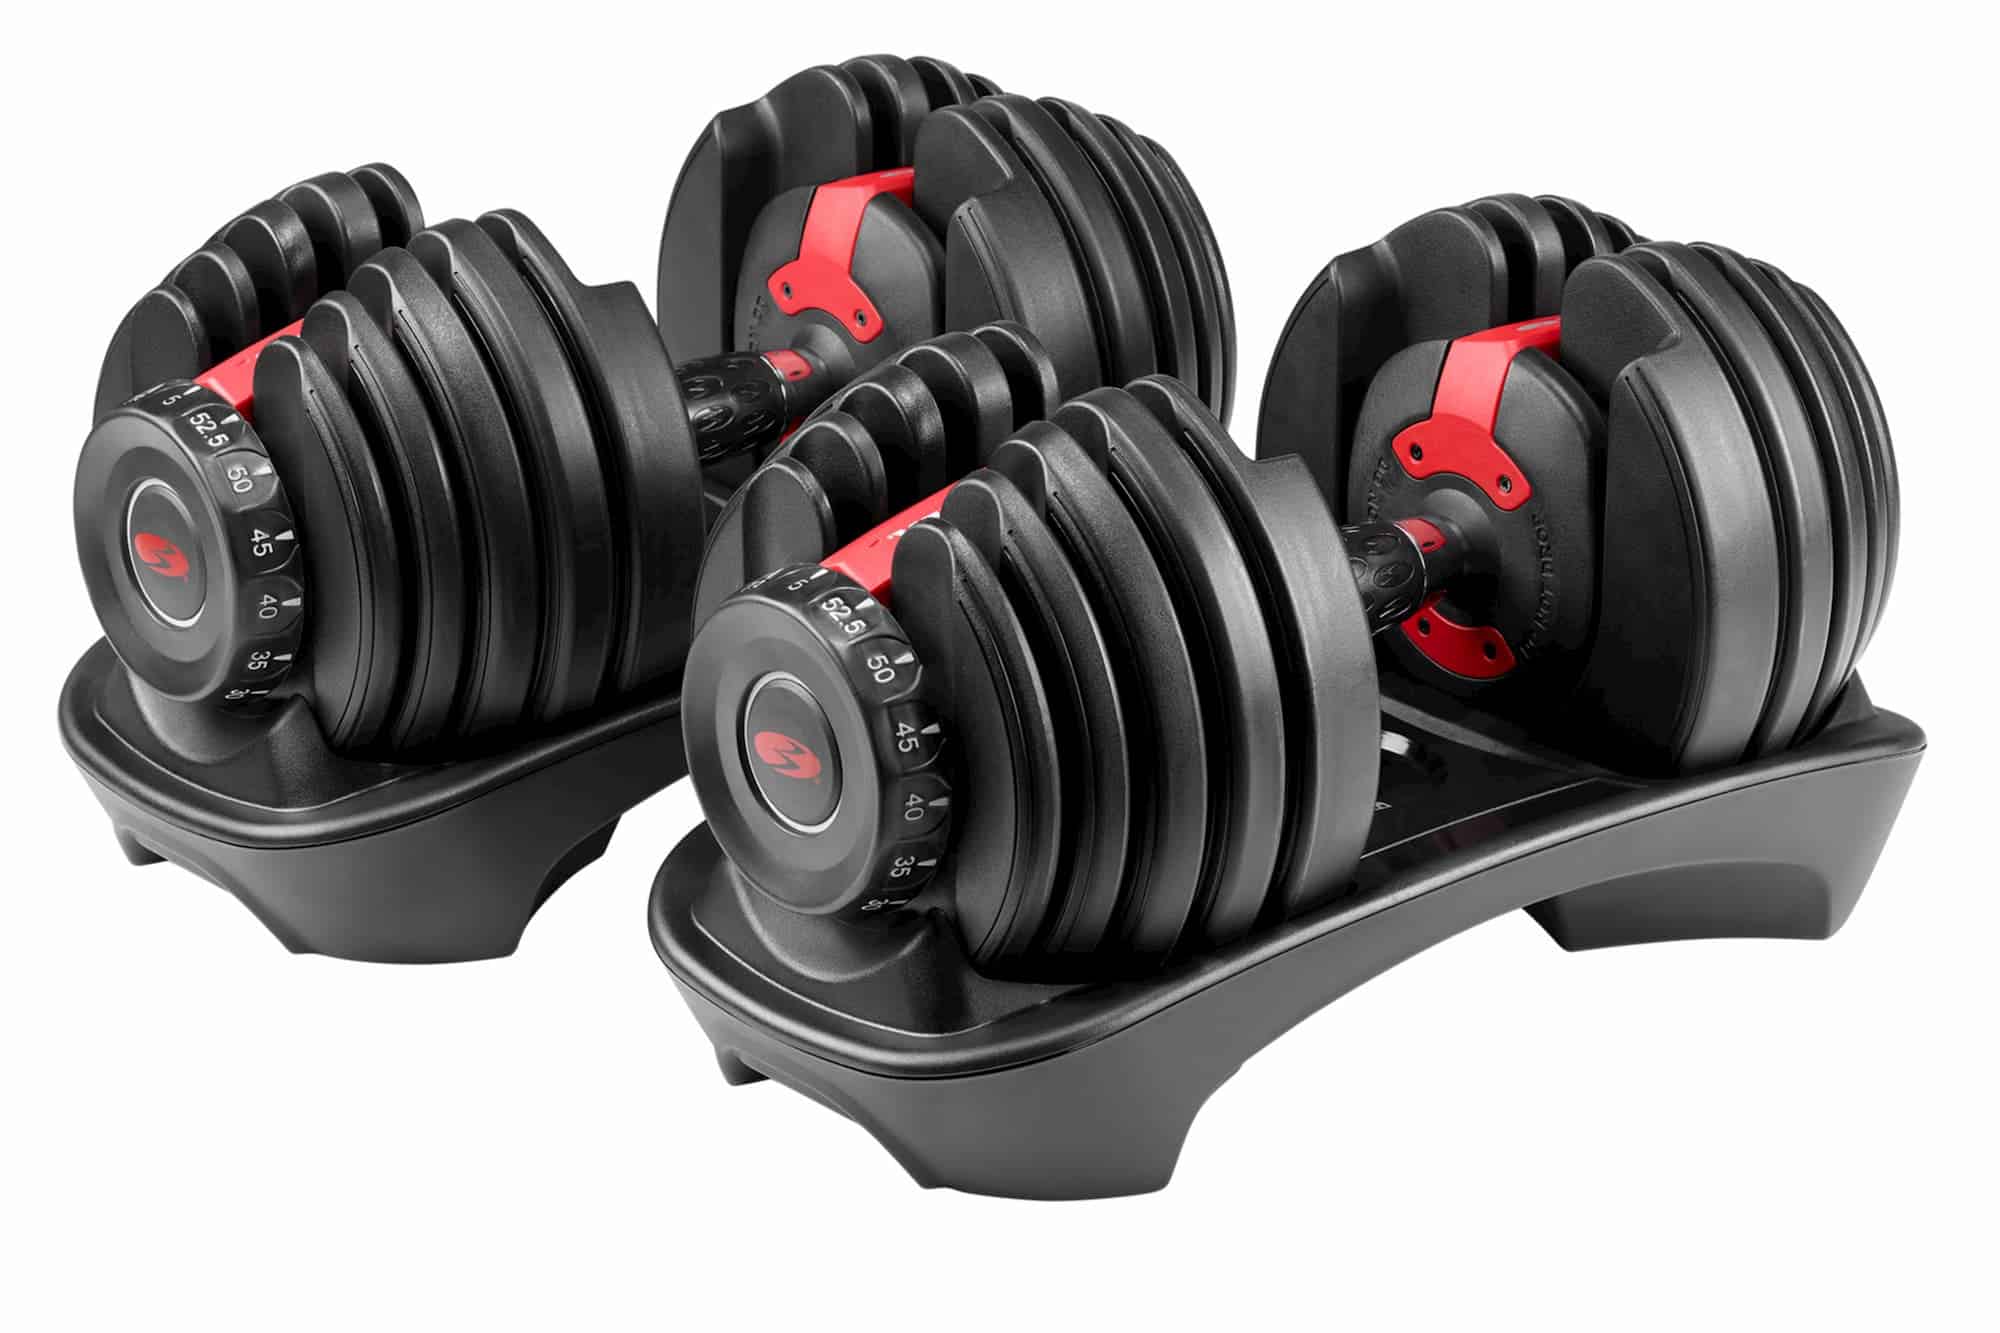 Are BowFlex 552 Worth It? Expanding Your Home Gym Needs